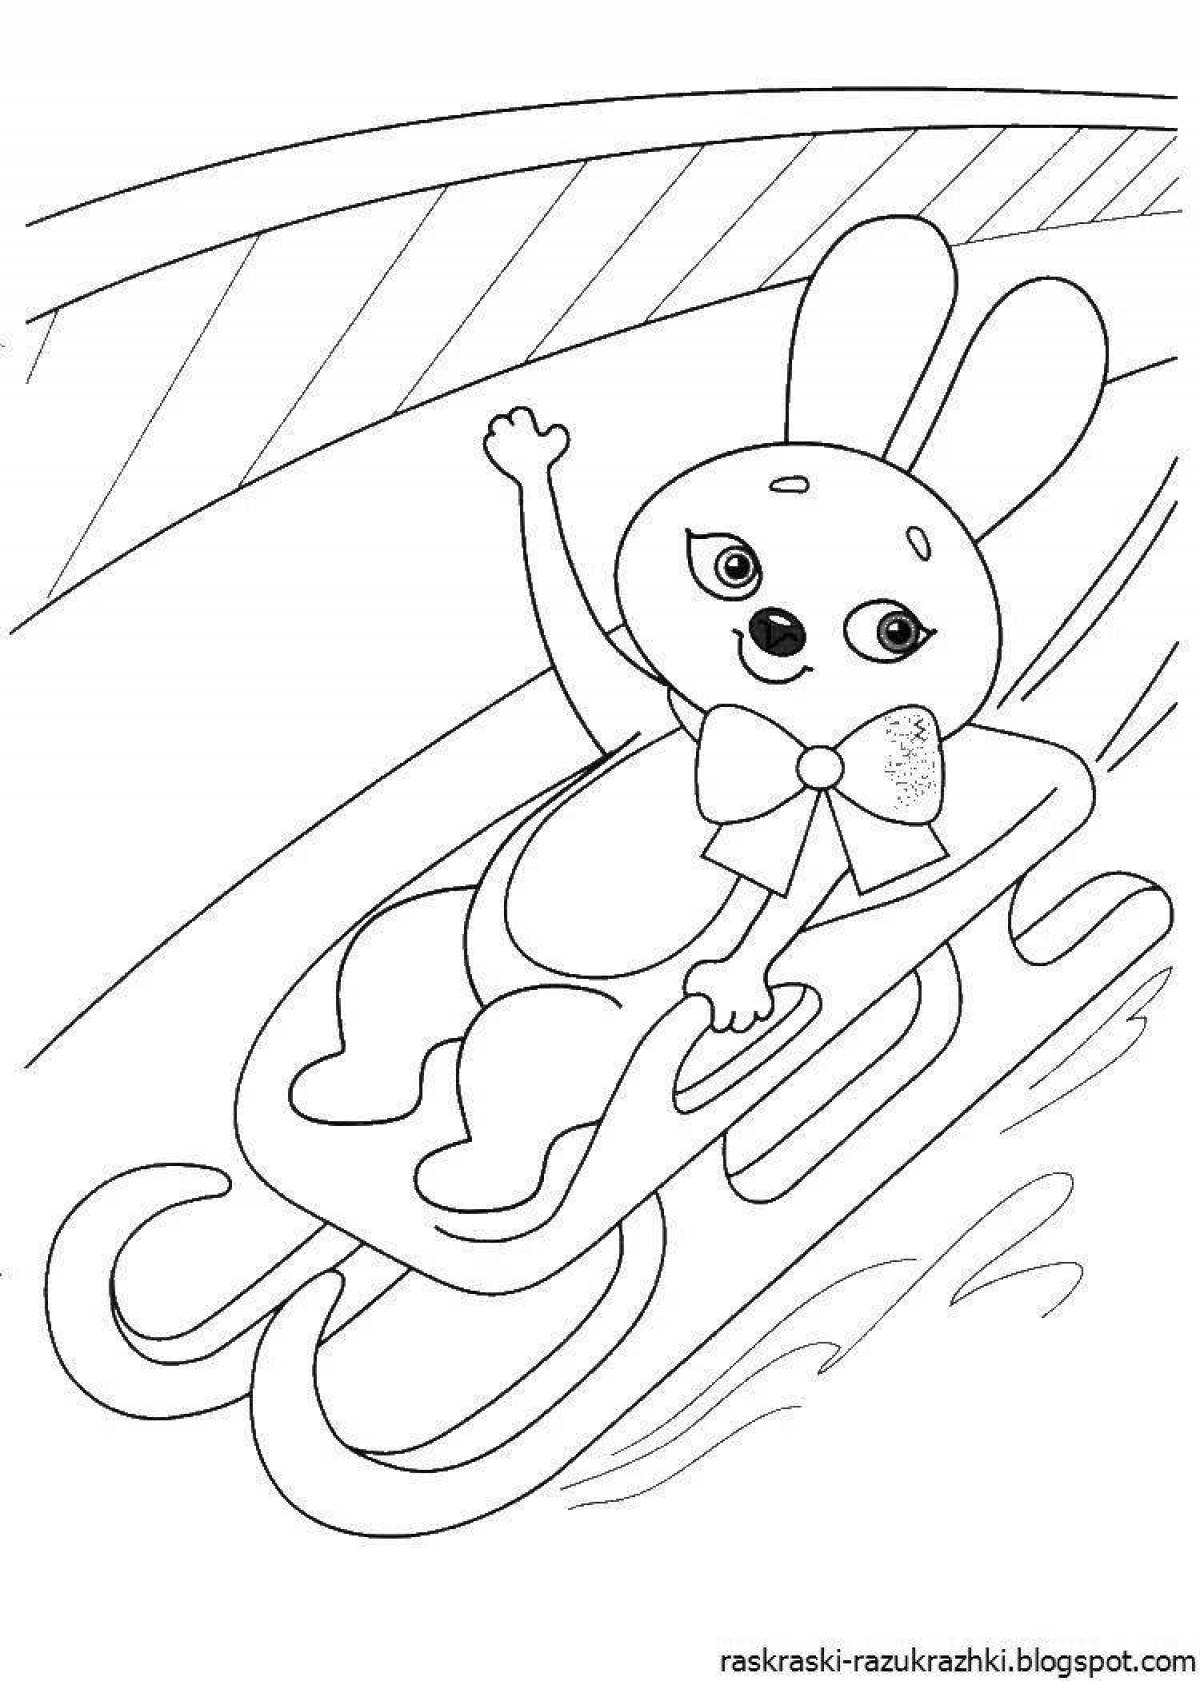 Coloring book amazing winter olympics